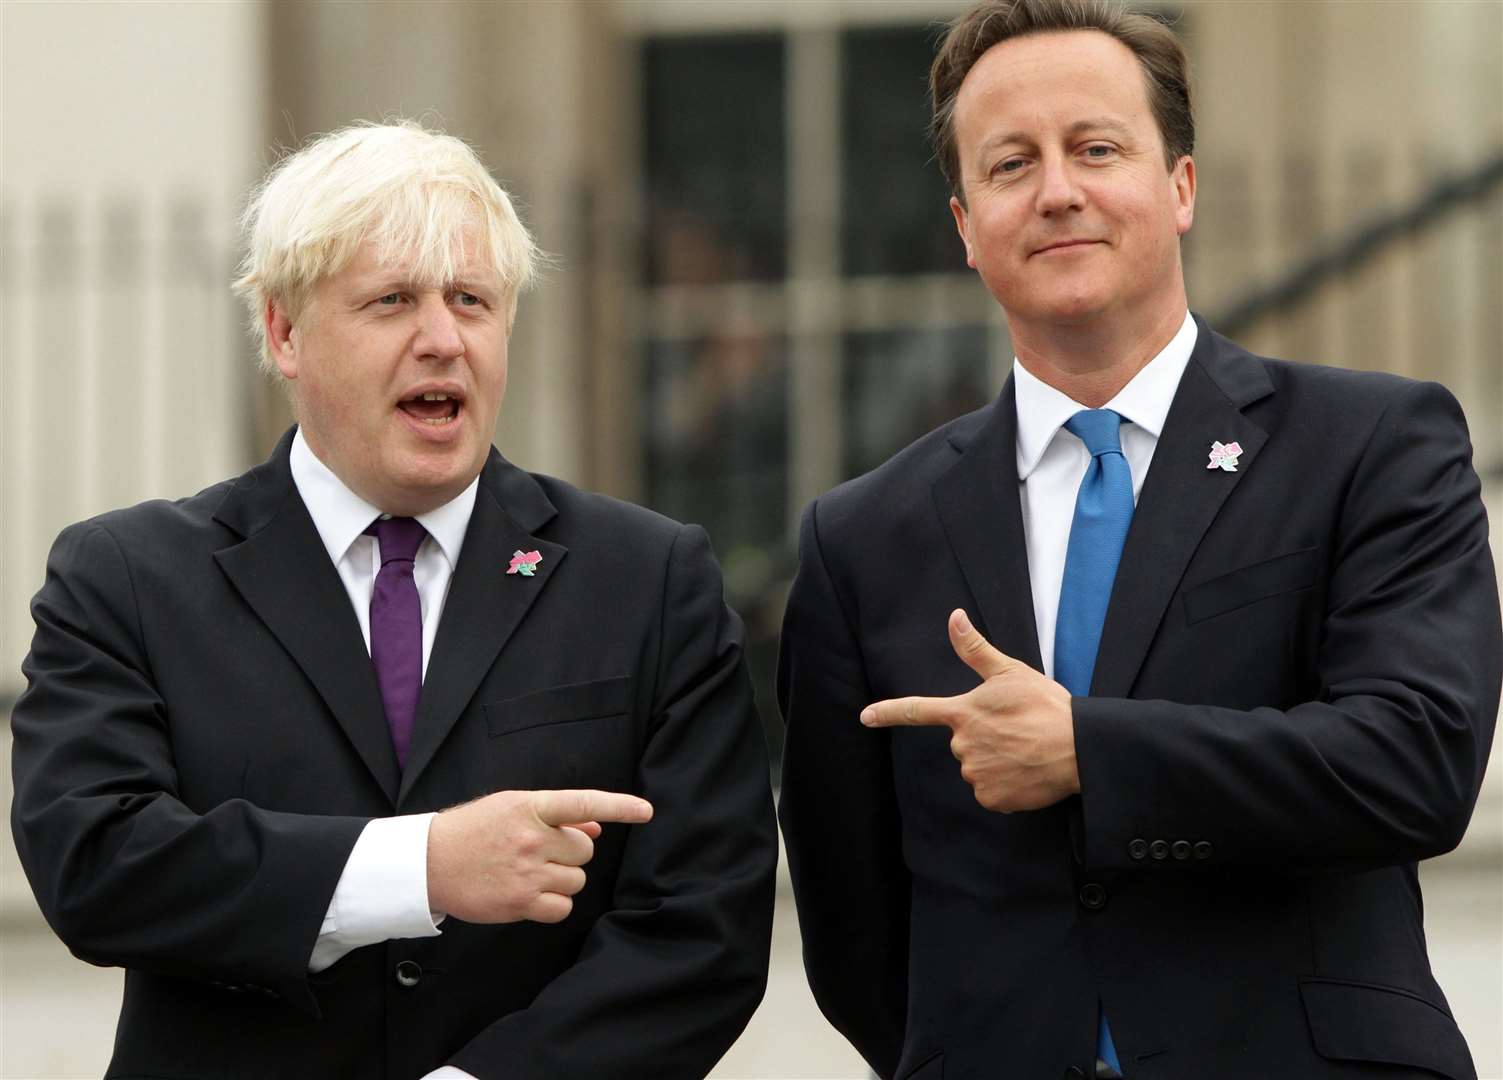 Former Prime Minister David Cameron with current PM Boris Johnson in 2013